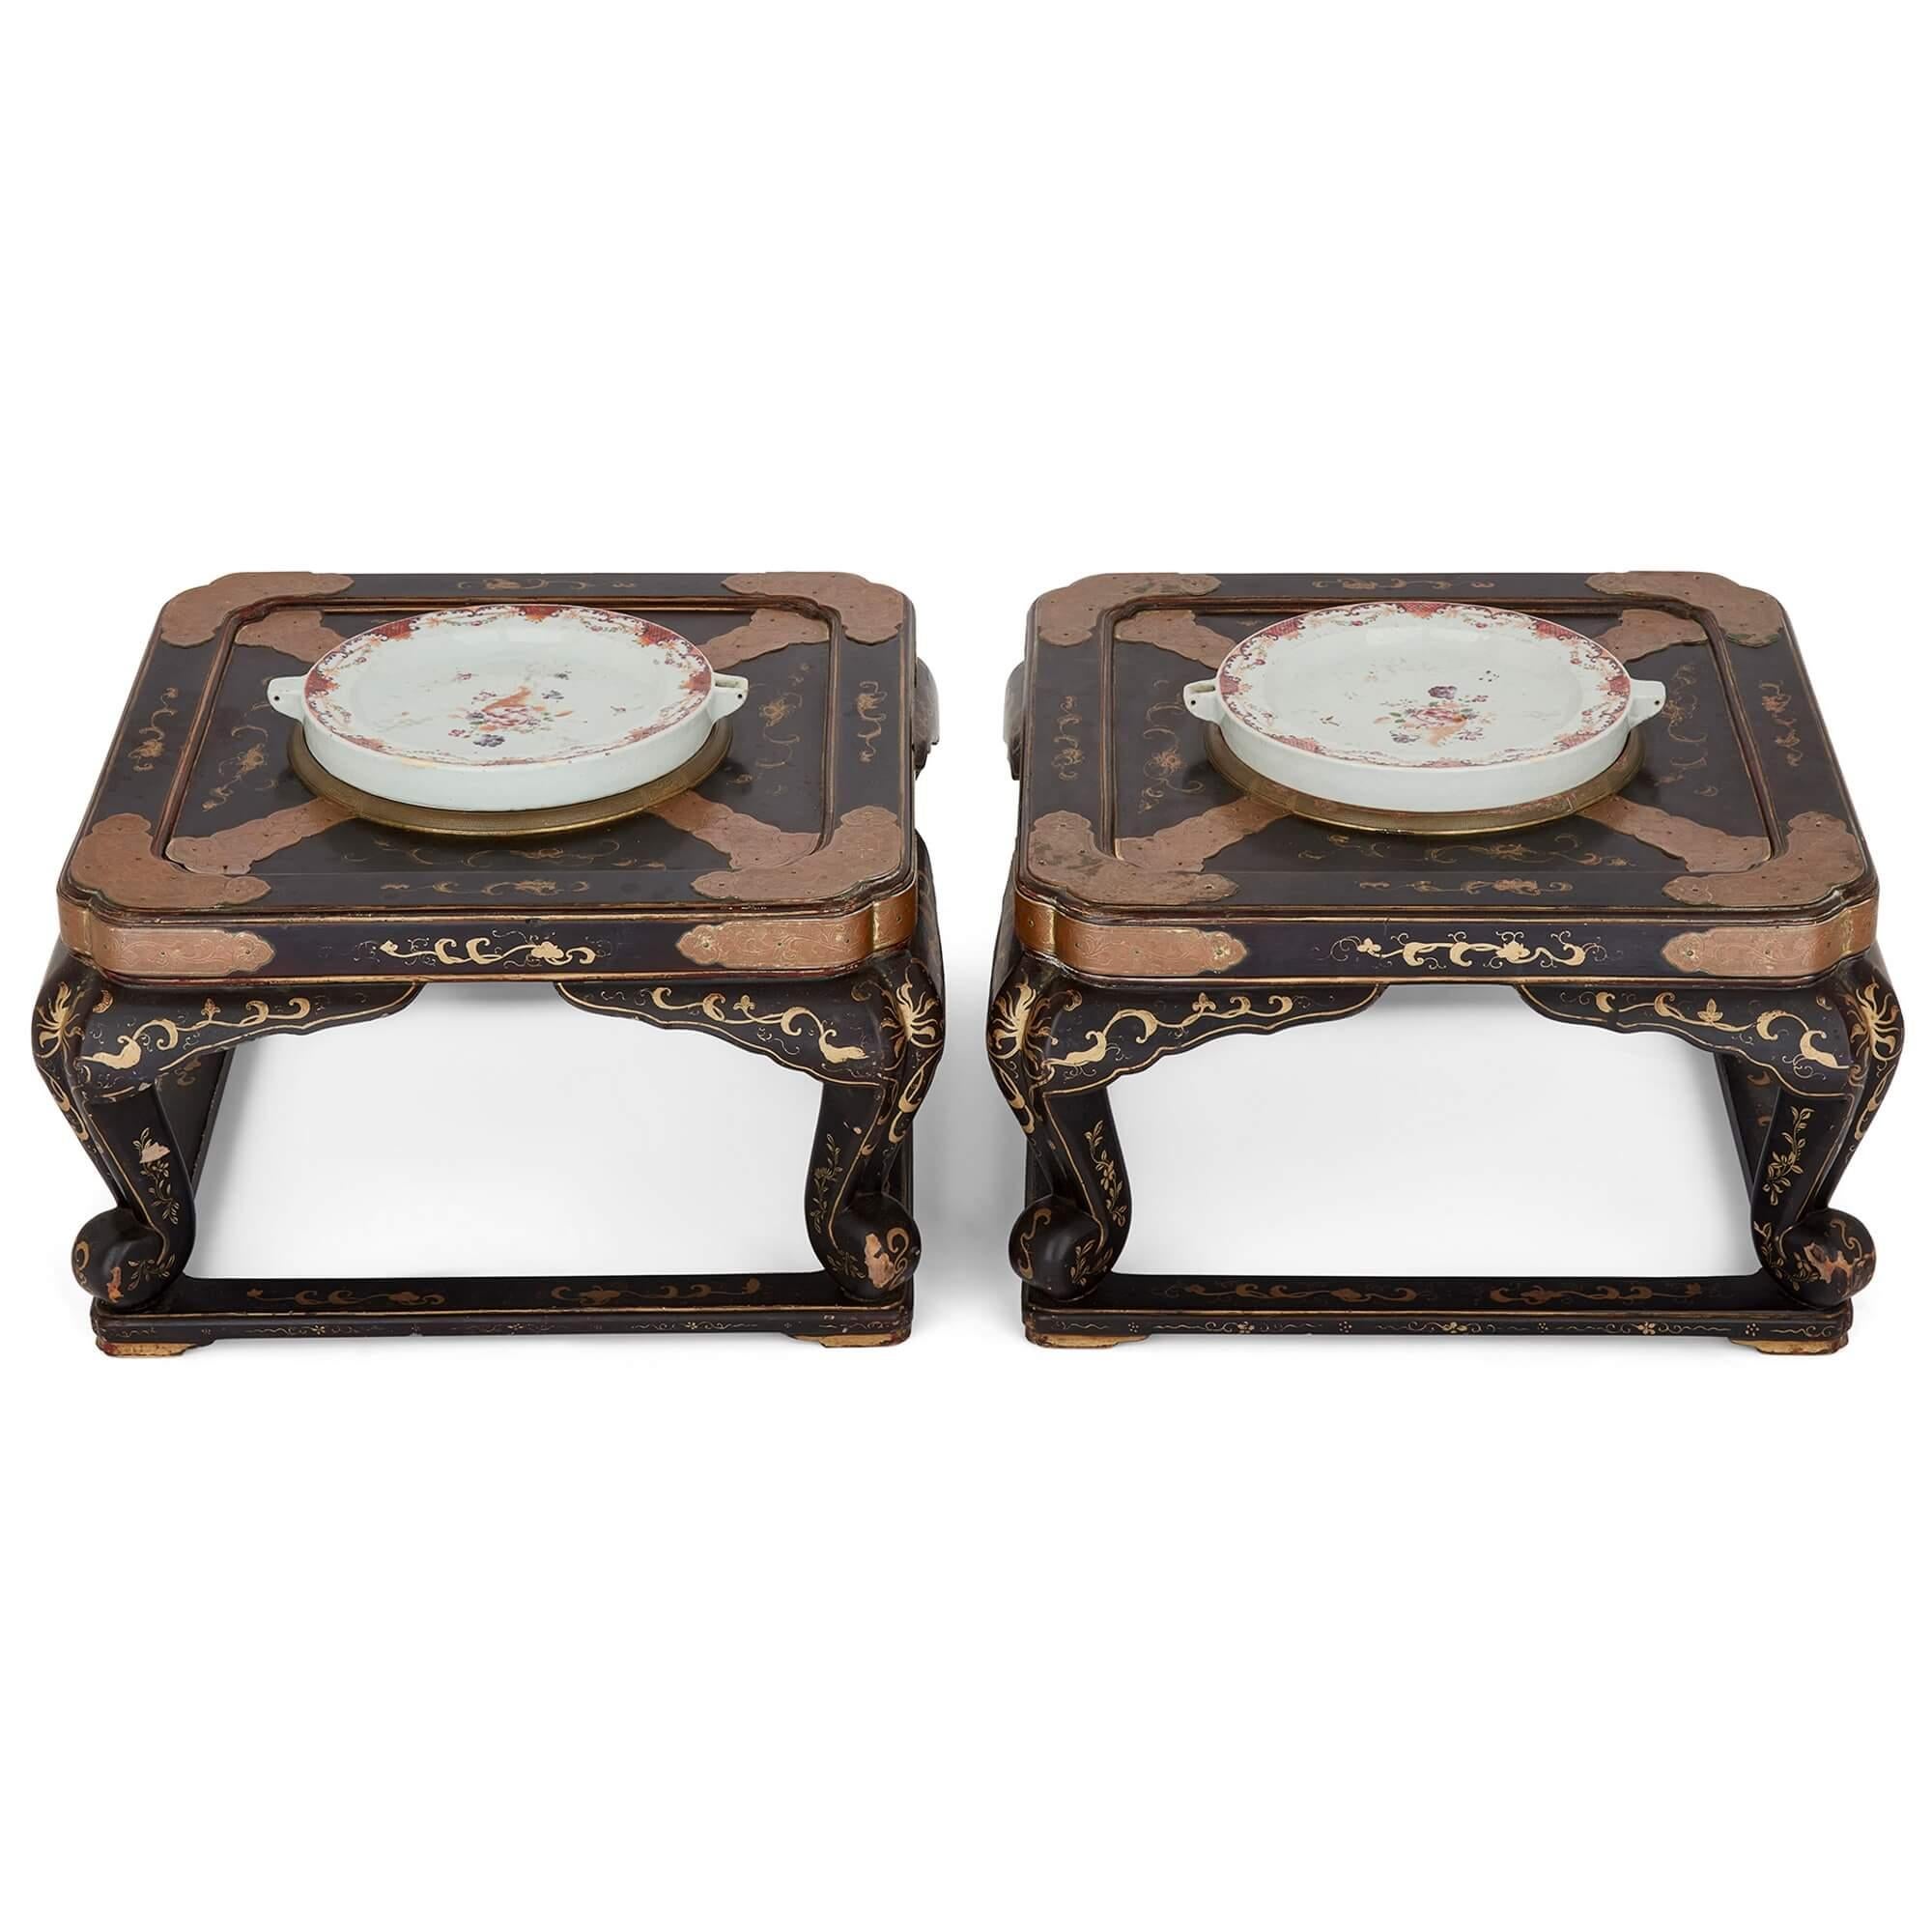 Pair of antique Chinese lacquered low tables with porcelain warming plates
Chinese, 18th and 19th Century
Height 30cm, width 51cm, depth 51cm

This pair of lacquered low tables fitted with porcelain warming plates showcases high quality Chinese